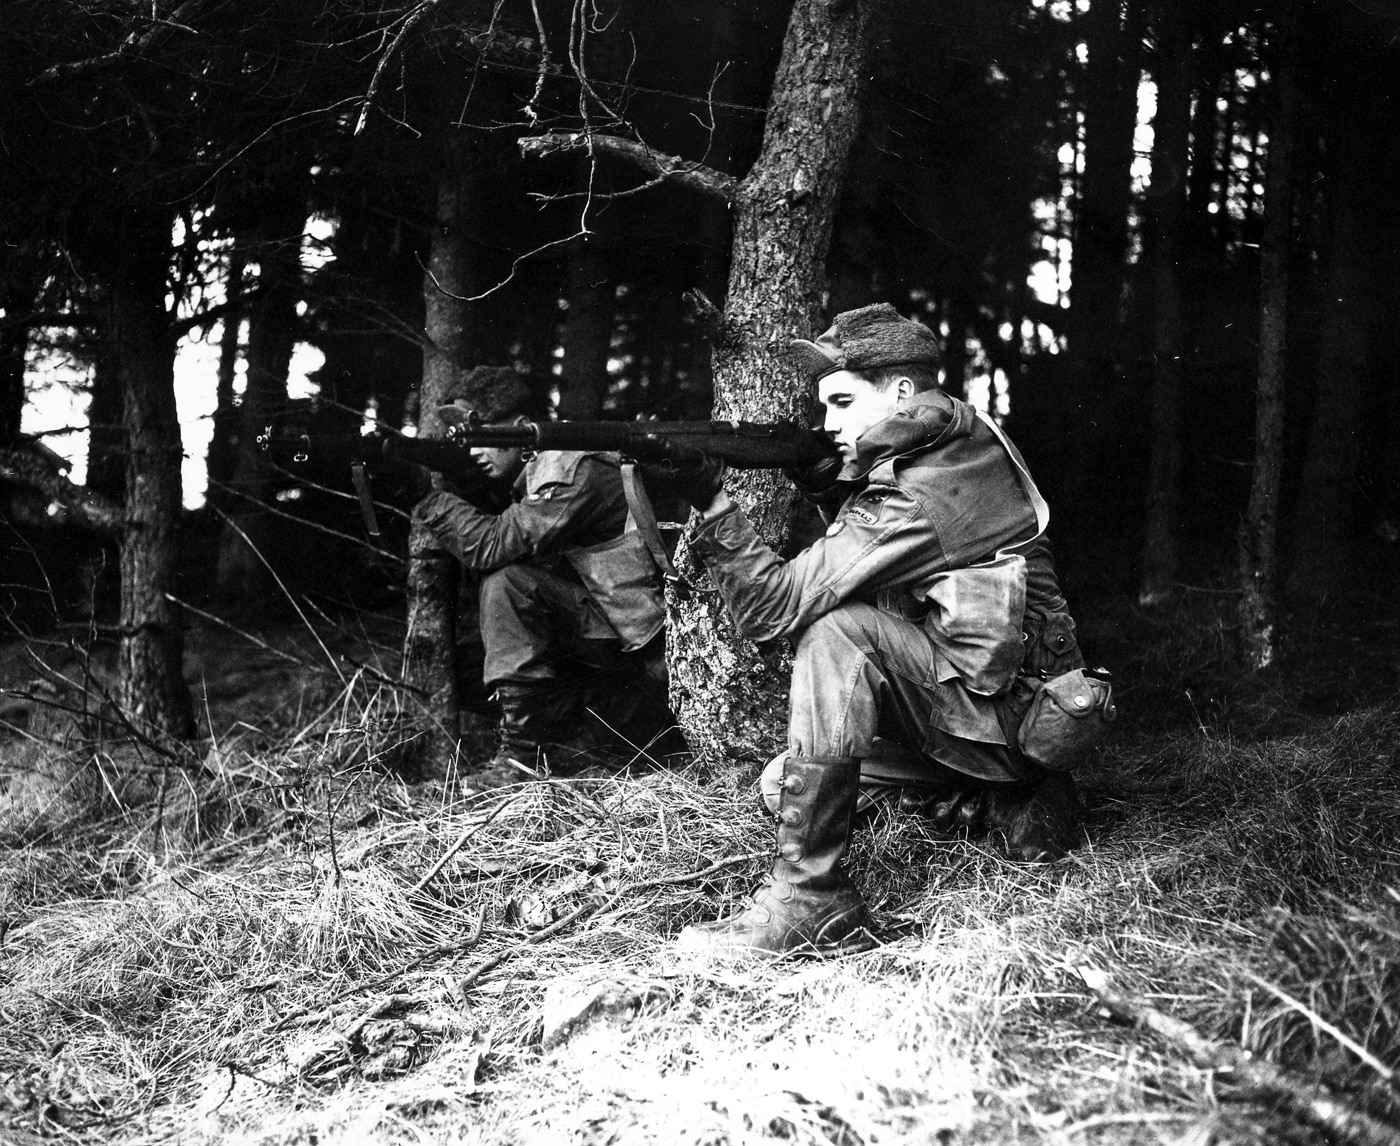 sgt elvis presley shooting m1 garand 3rd armored division us army west germany 1960